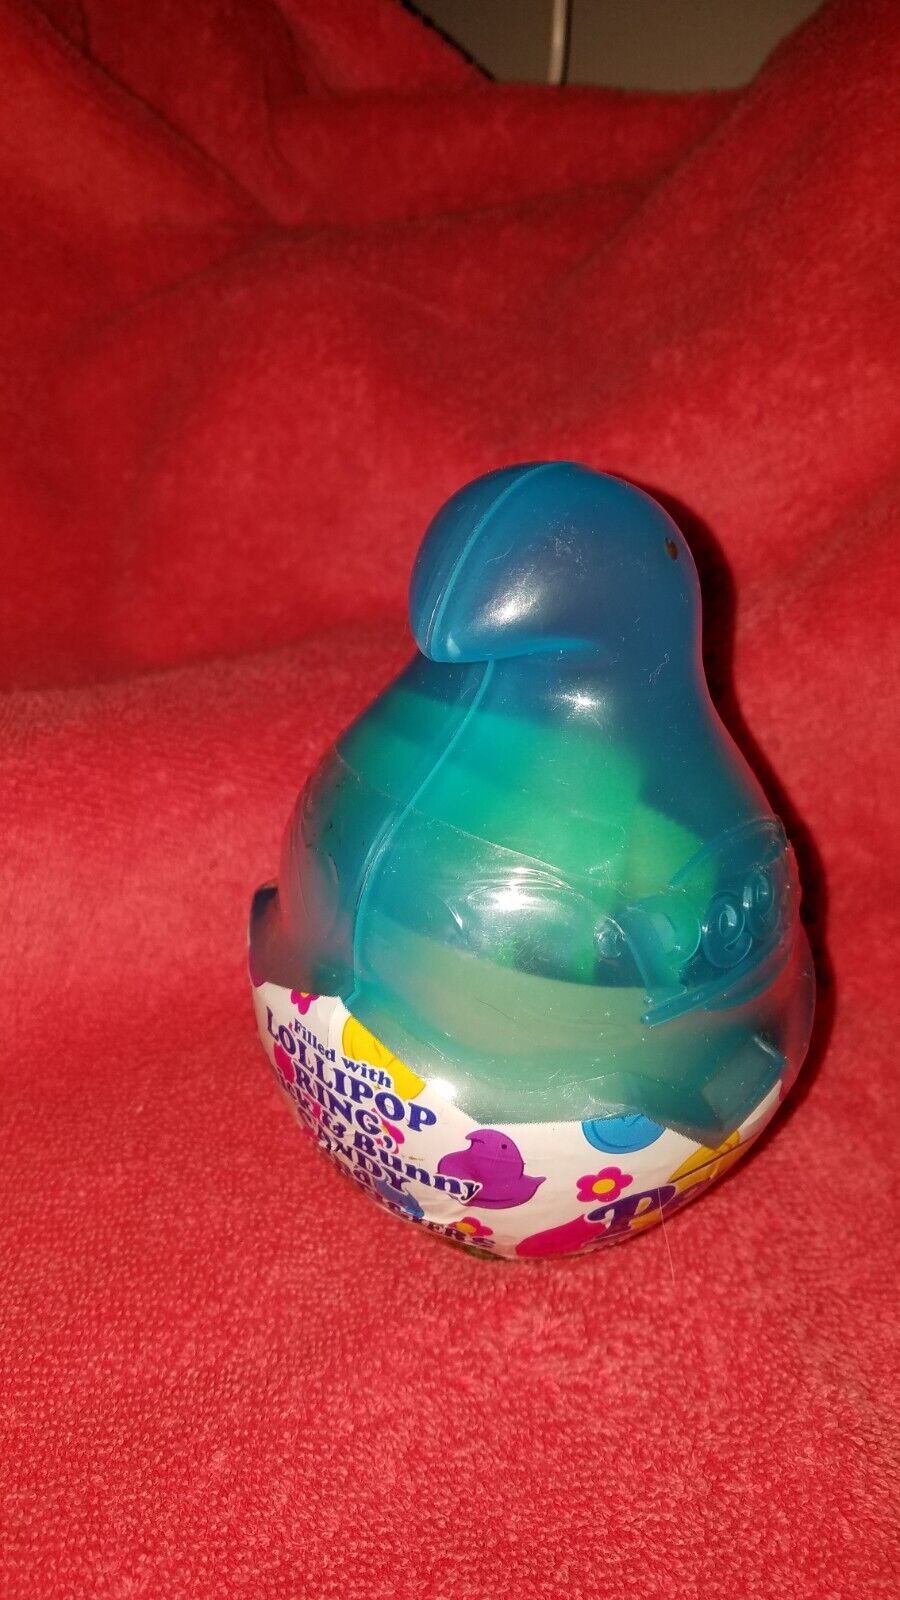 VTG 2007 Peeps Blue Snap Together Plastic Chick Filled w/ Candy/ Stickers New